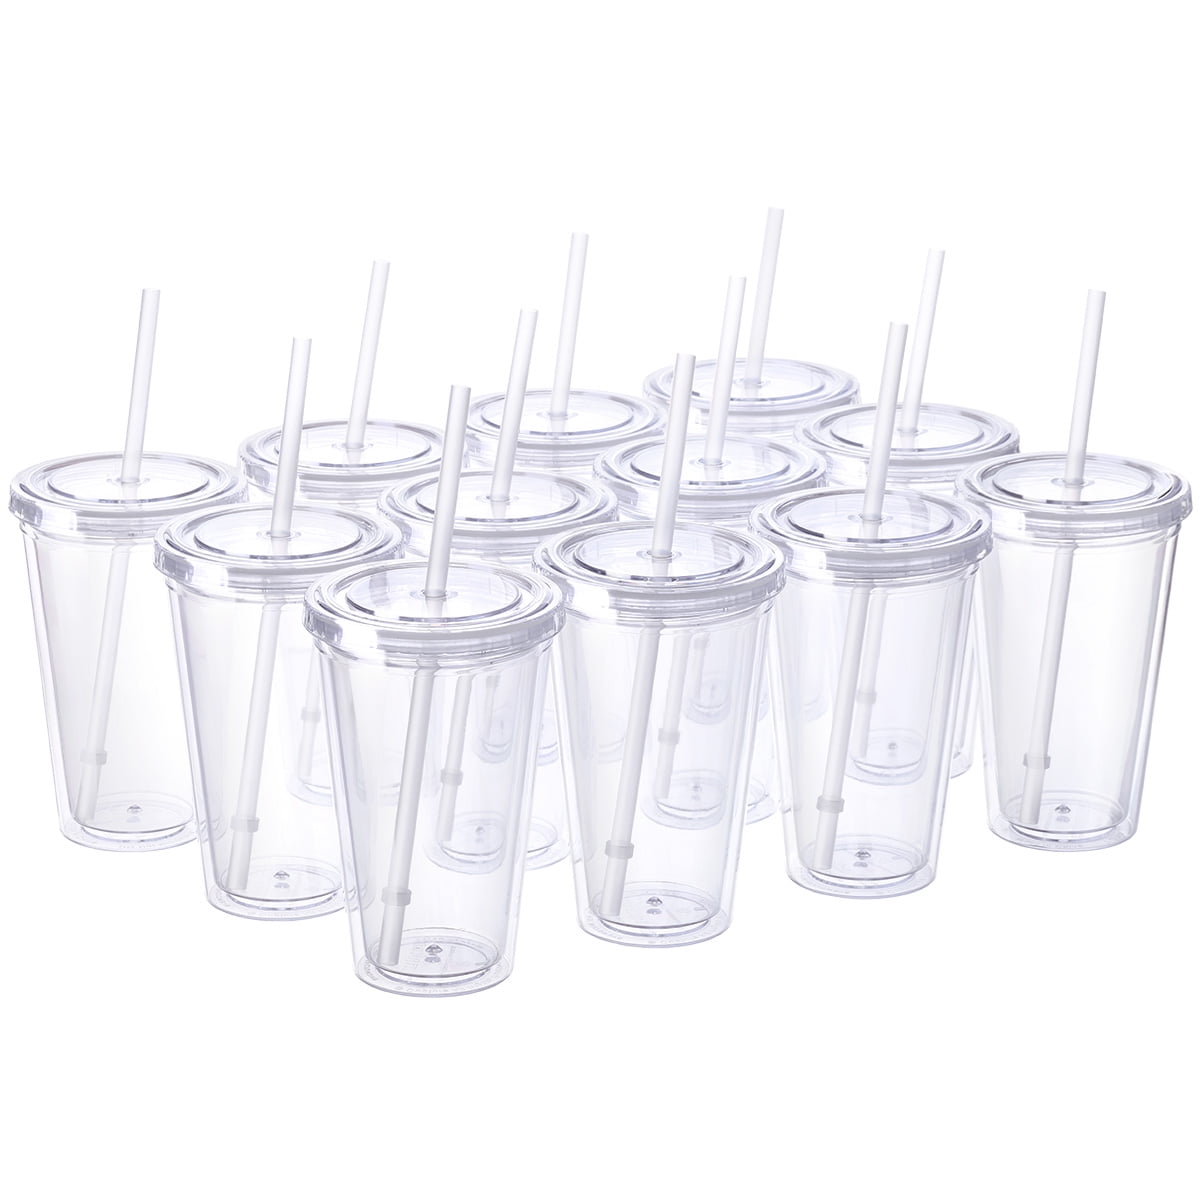 12 Packs 16 oz Tumbler with Straw and Lid Kids Cups with Straws and Lids  Water Bottle Reusable Water…See more 12 Packs 16 oz Tumbler with Straw and